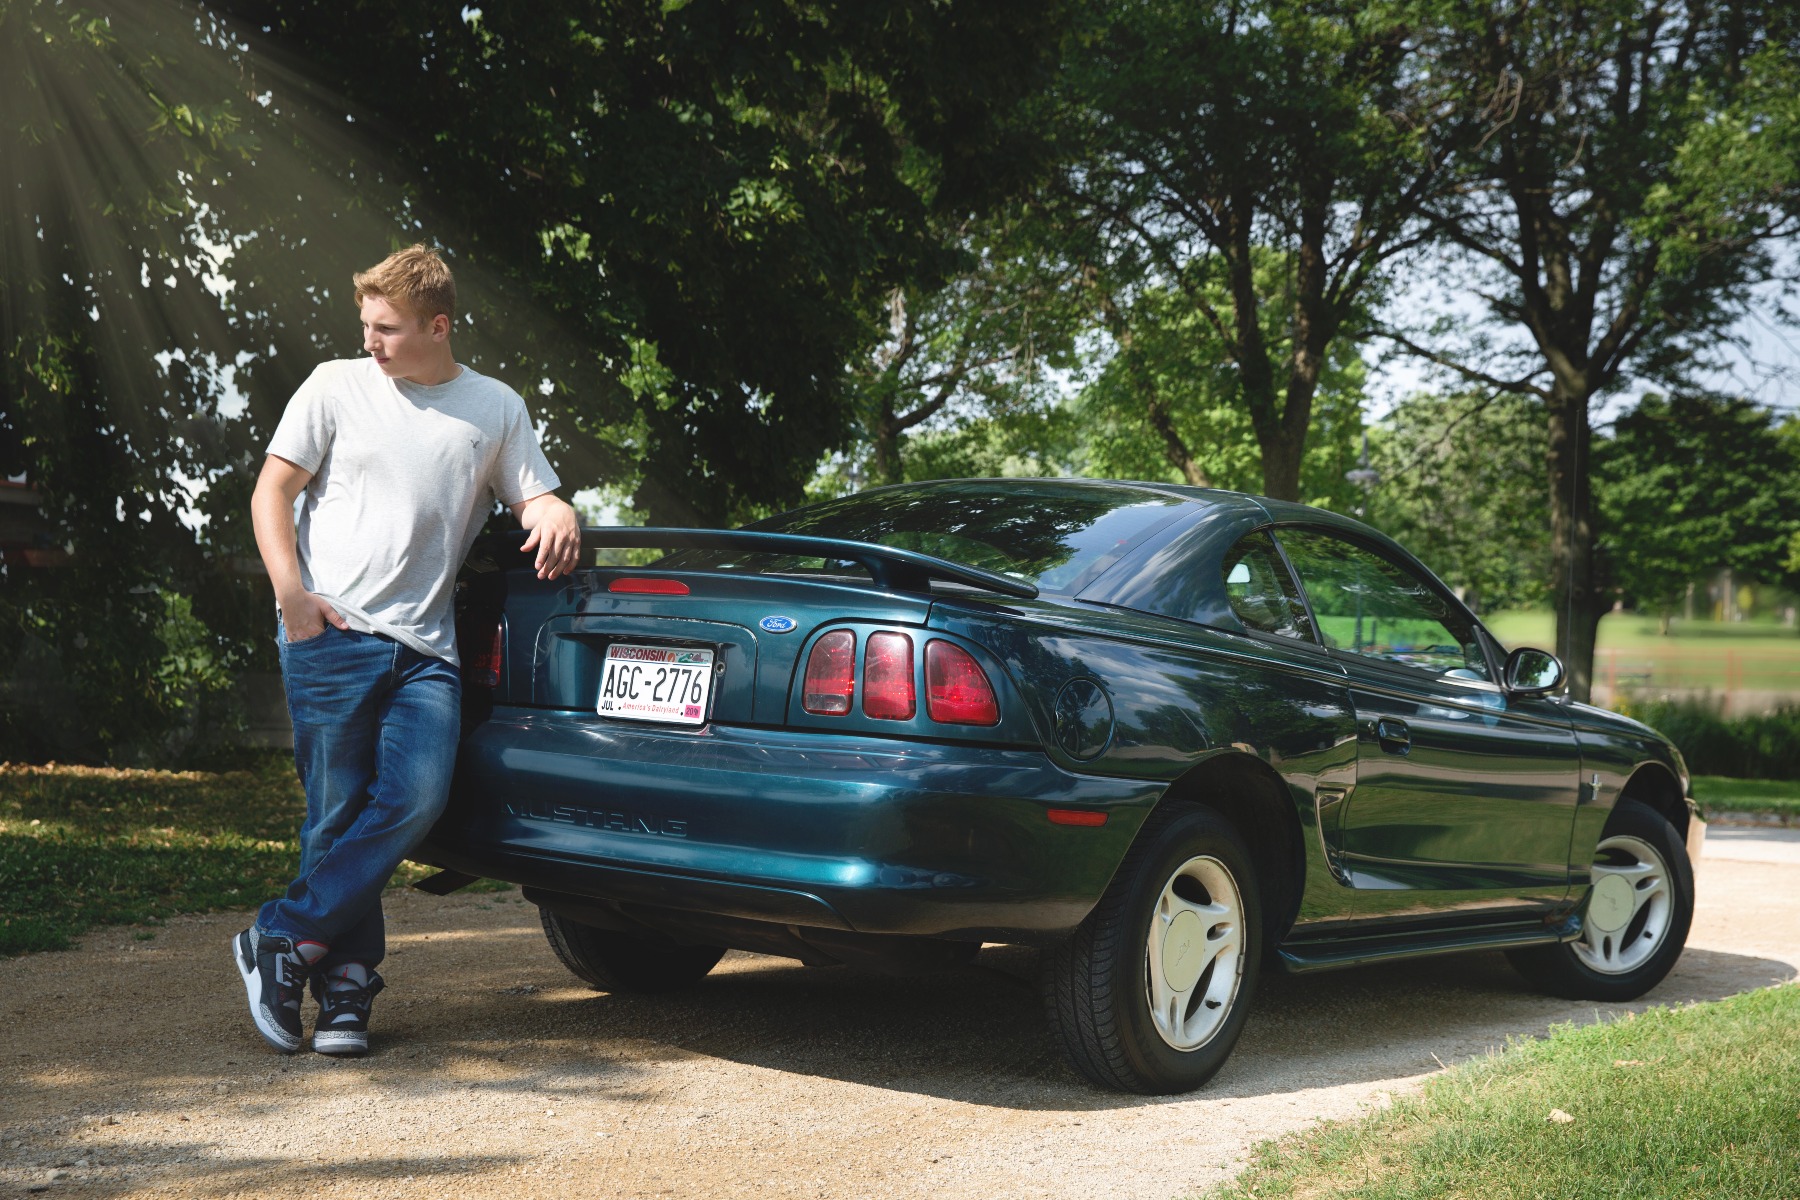 hs senior boy poses with his mustang